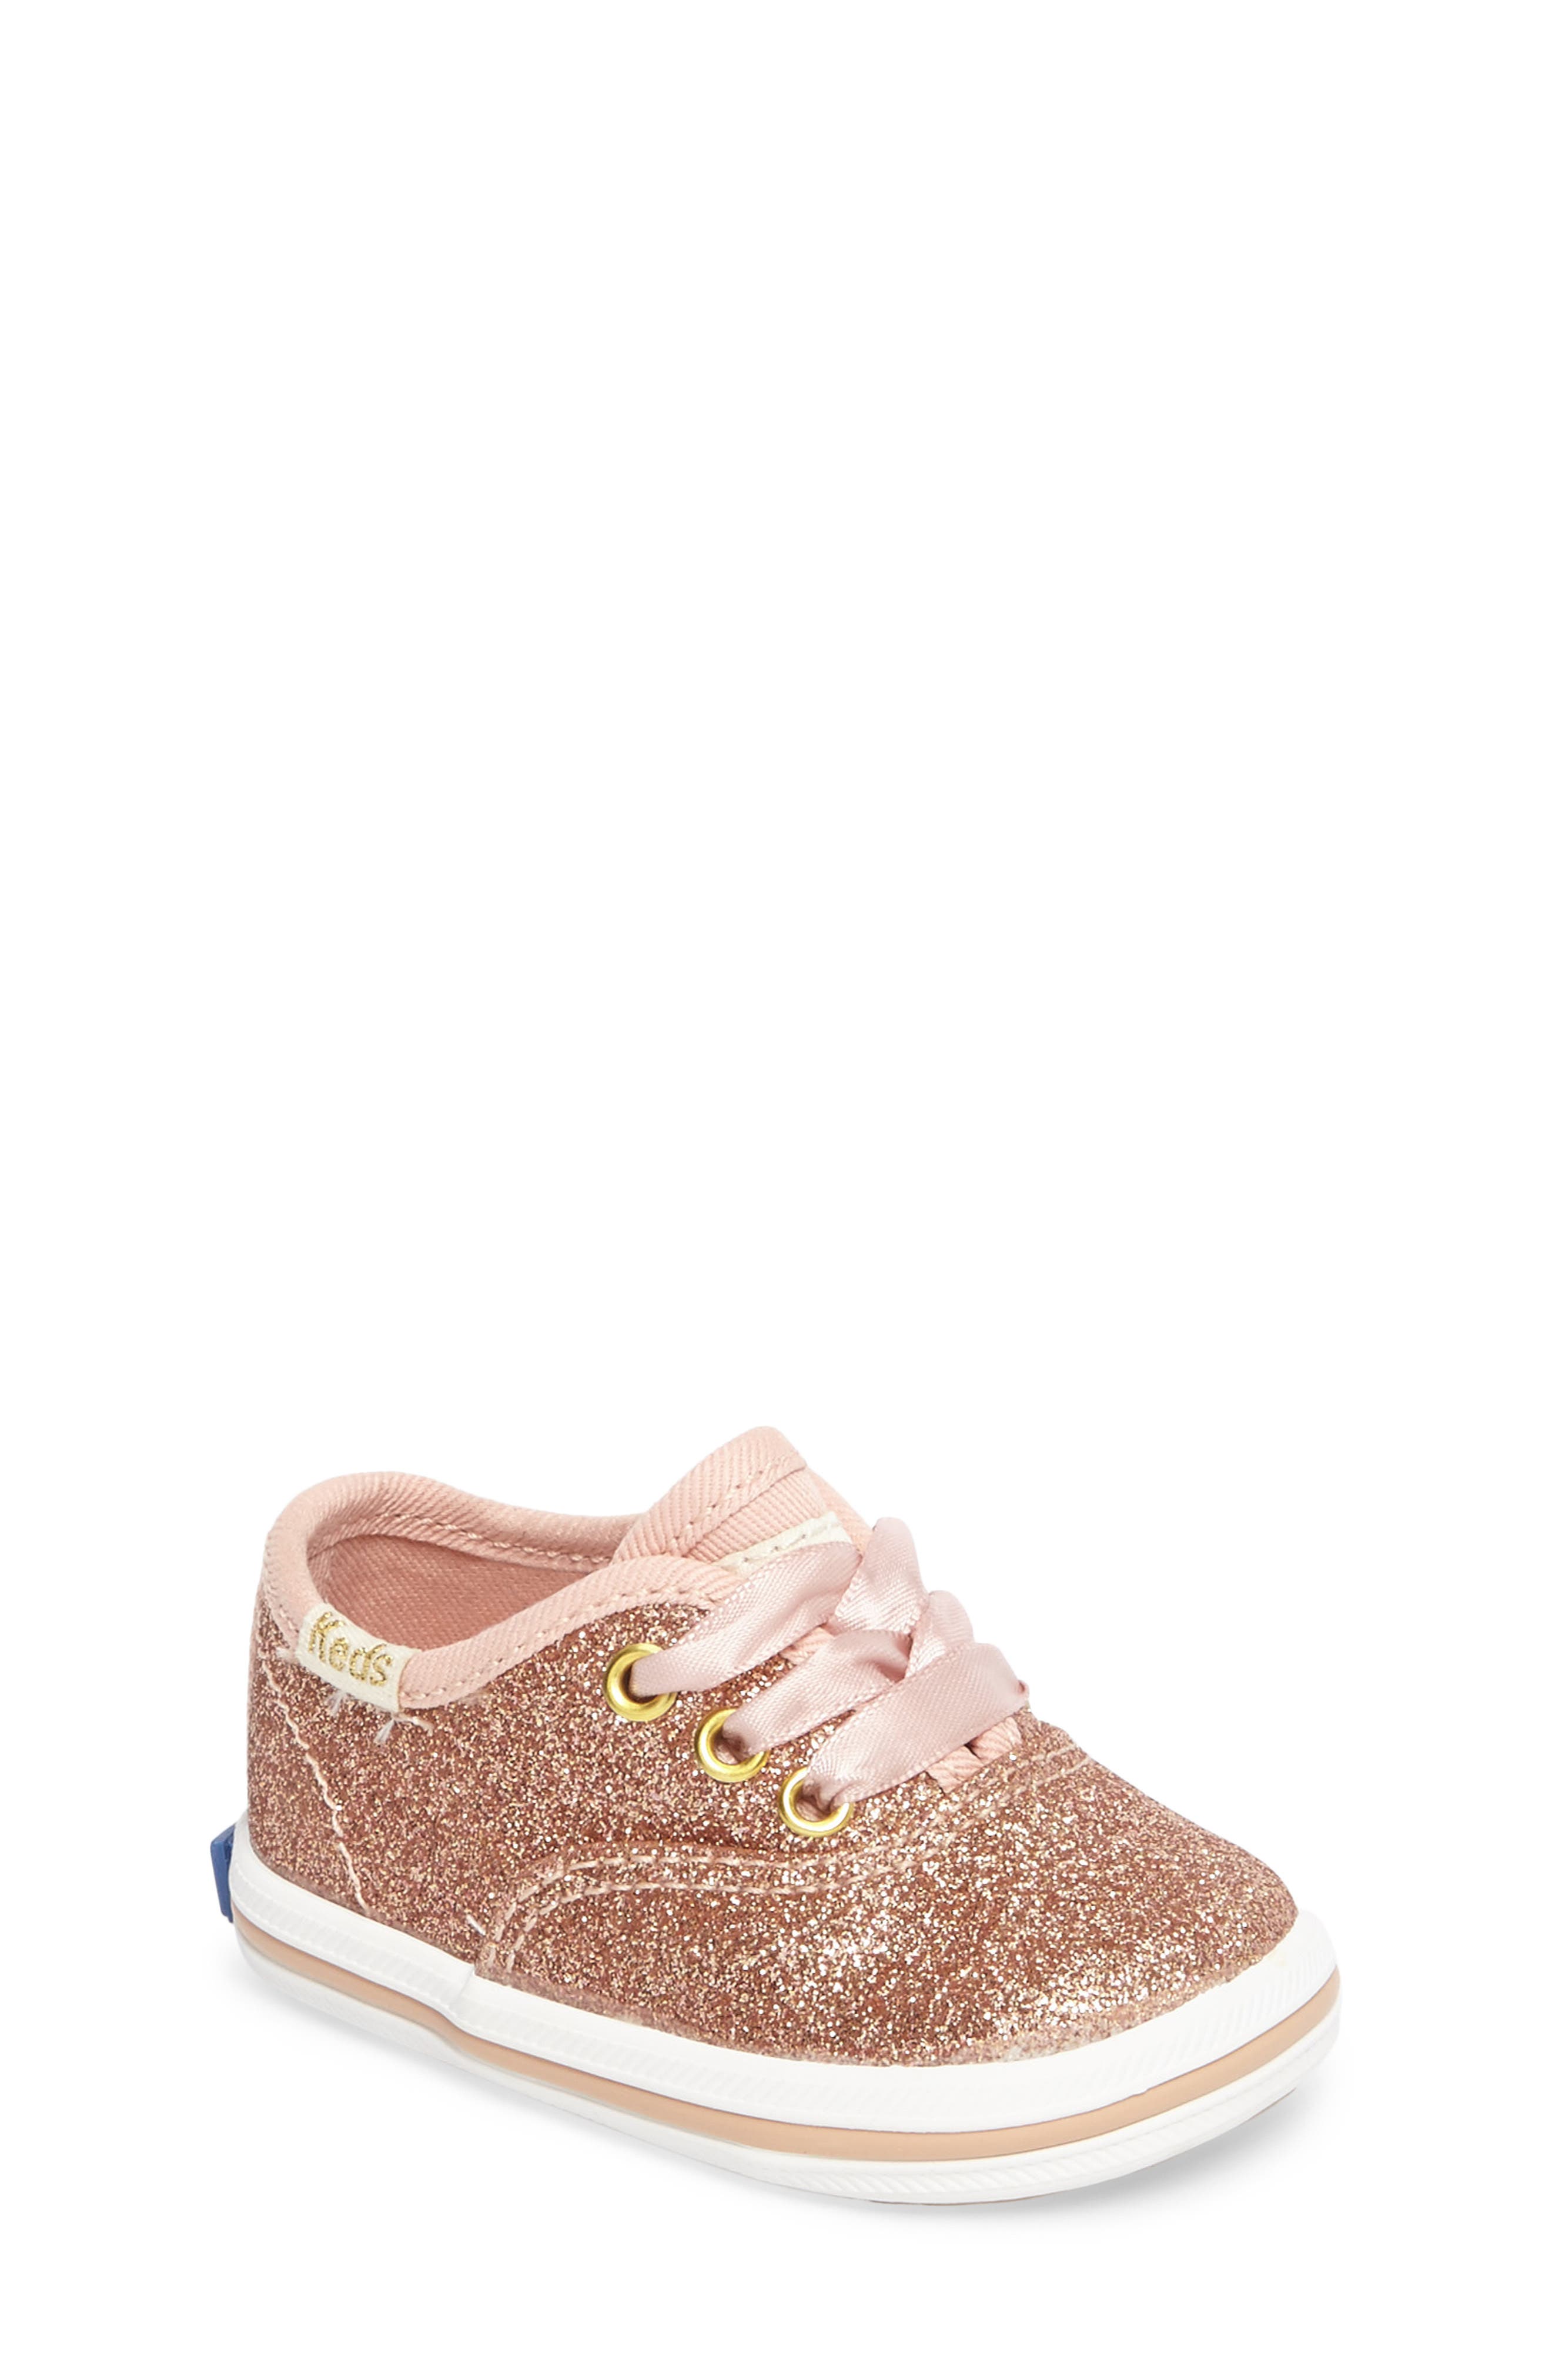 UPC 884401127265 product image for Keds(R) x kate spade new york Champion Glitter Crib Shoe in Rose Gold at  | upcitemdb.com